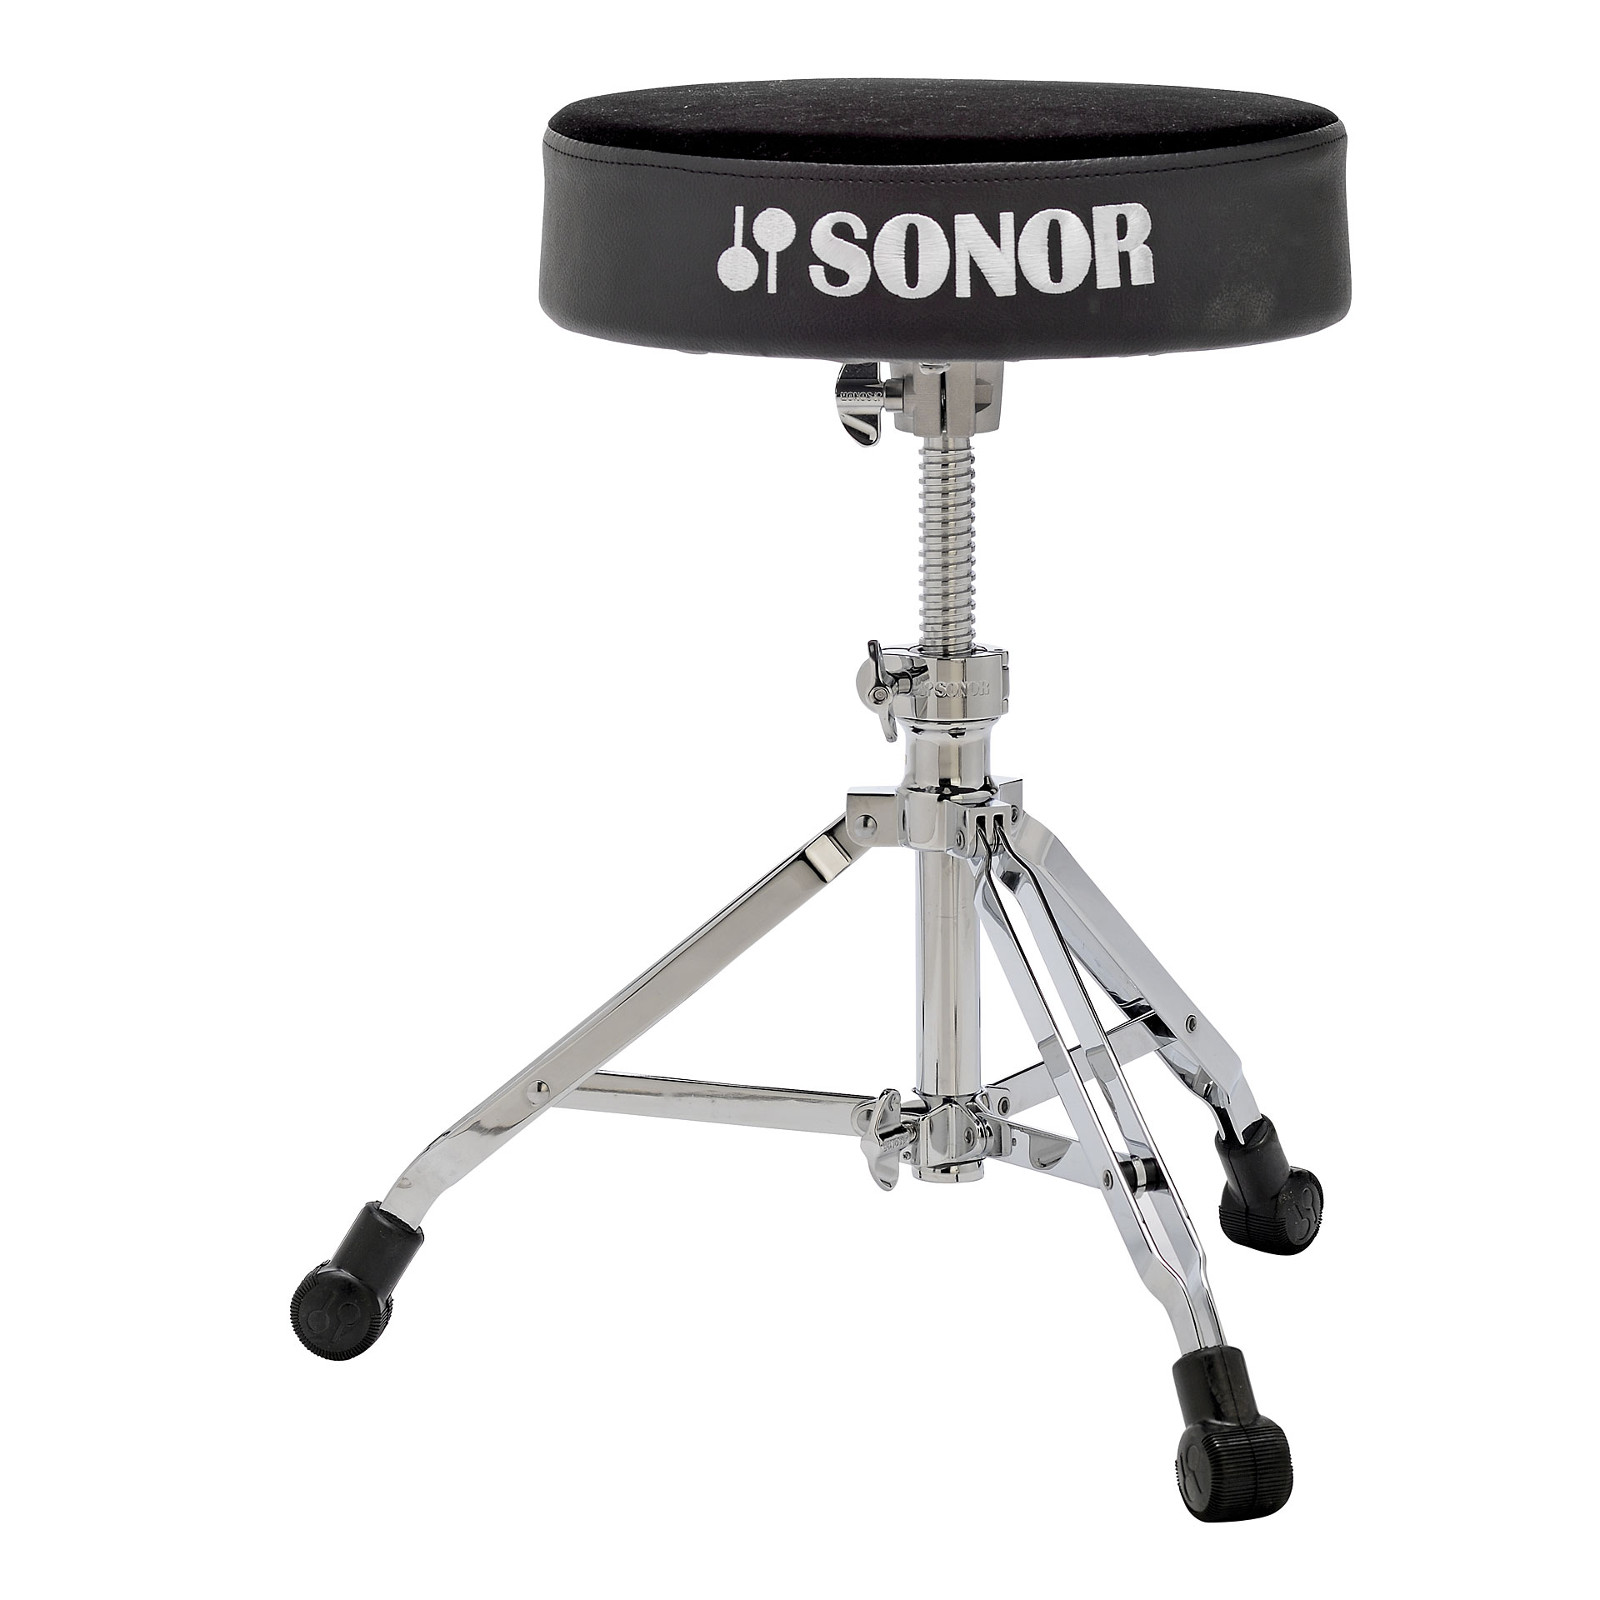 SONOR DT 4000